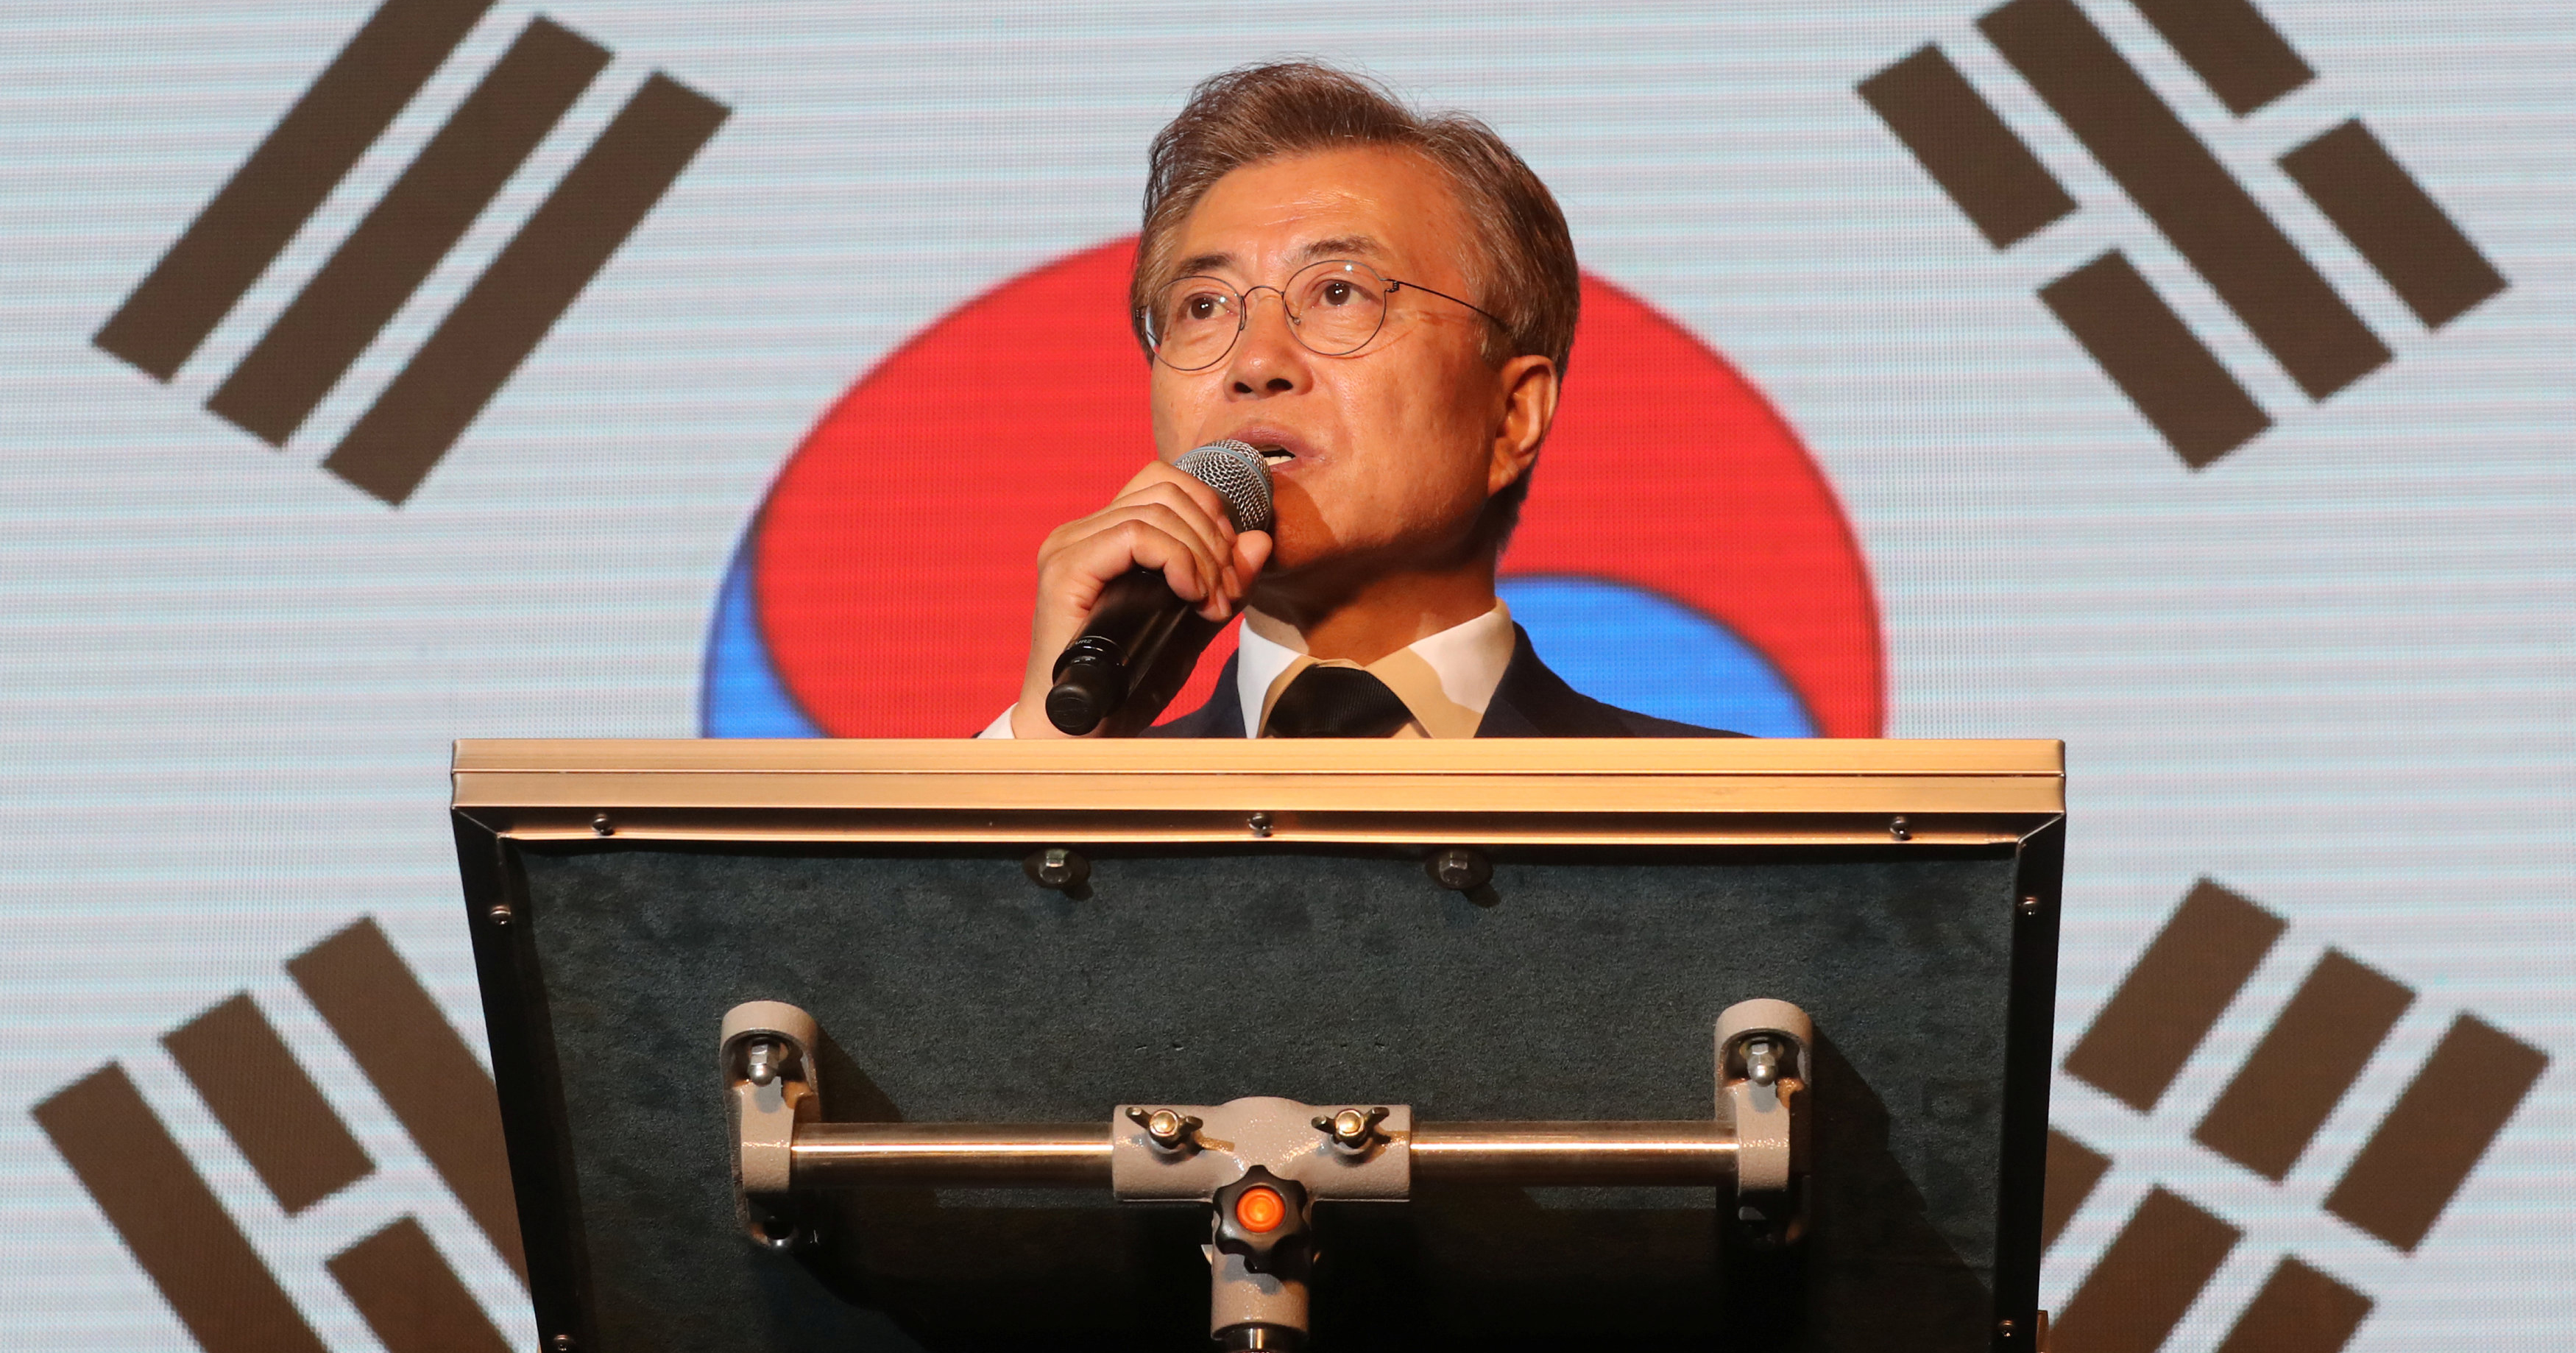 South Korea's president-elect Moon Jae-in speaks to supporters at Gwanghwamun Square in Seoul, South Korea, May 9, 2017.